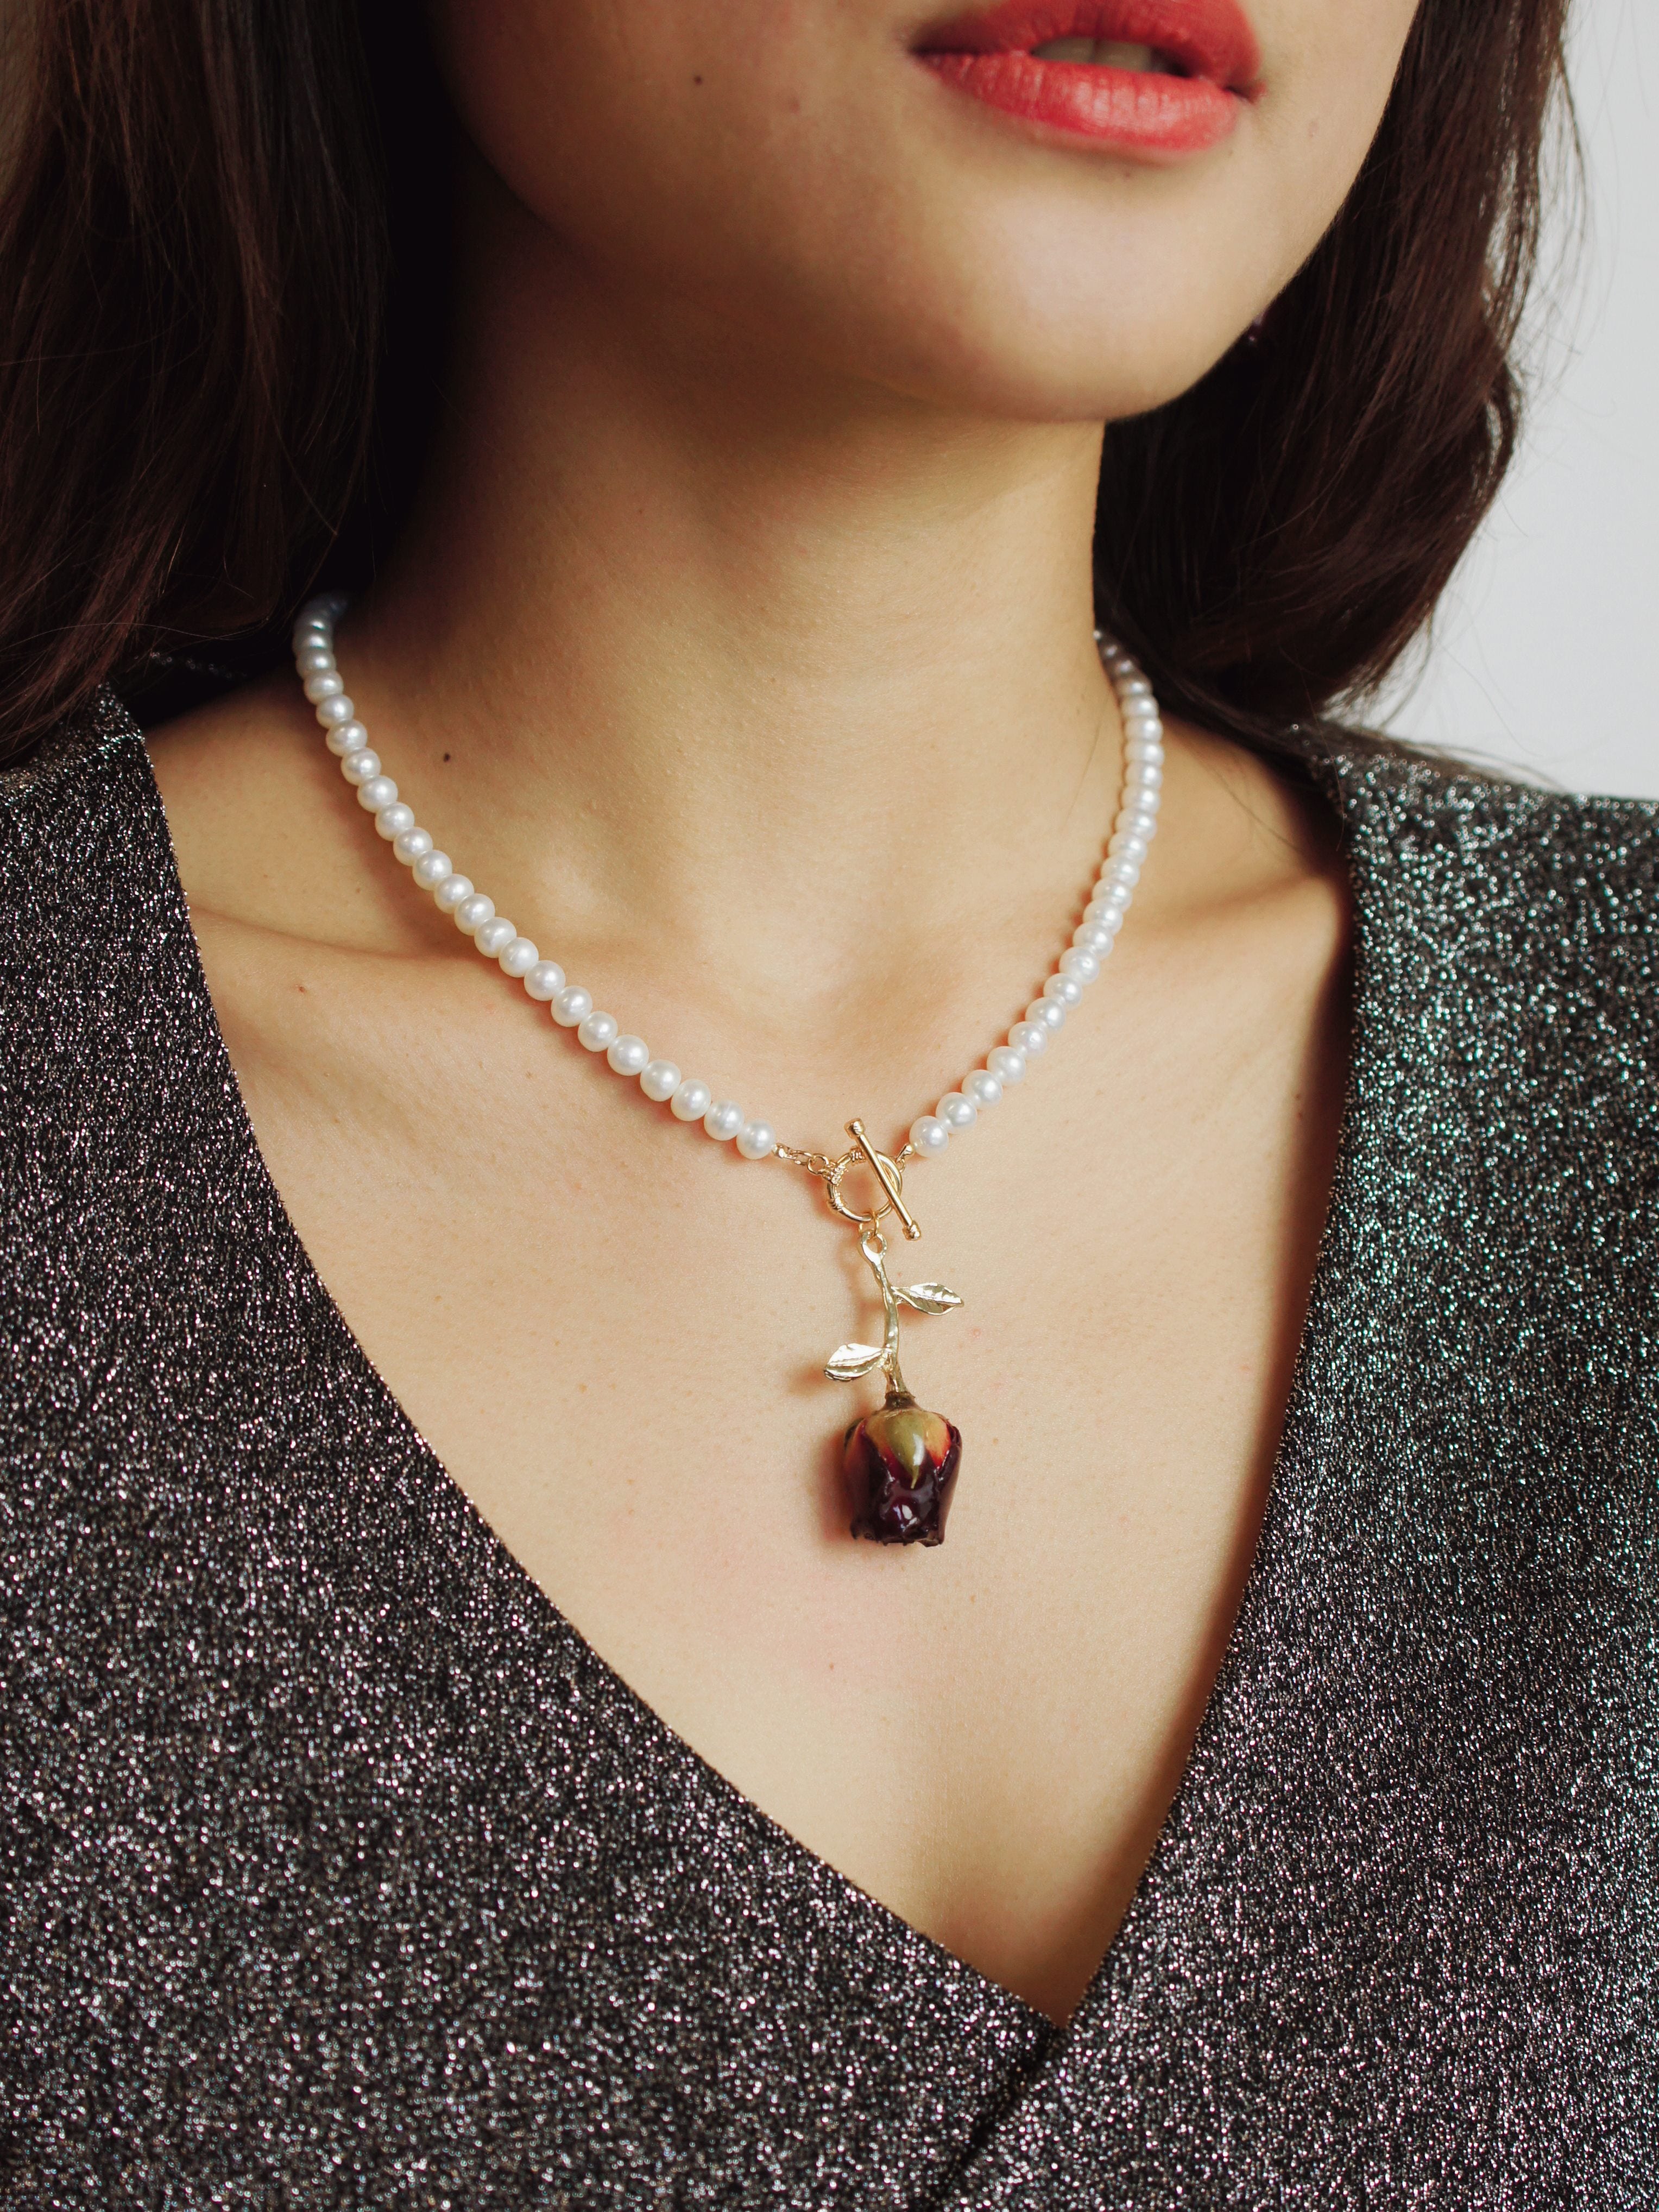 *REAL FLOWER* Grande Amore Freshwater Pearl Choker Necklace with Rosebud Pendant